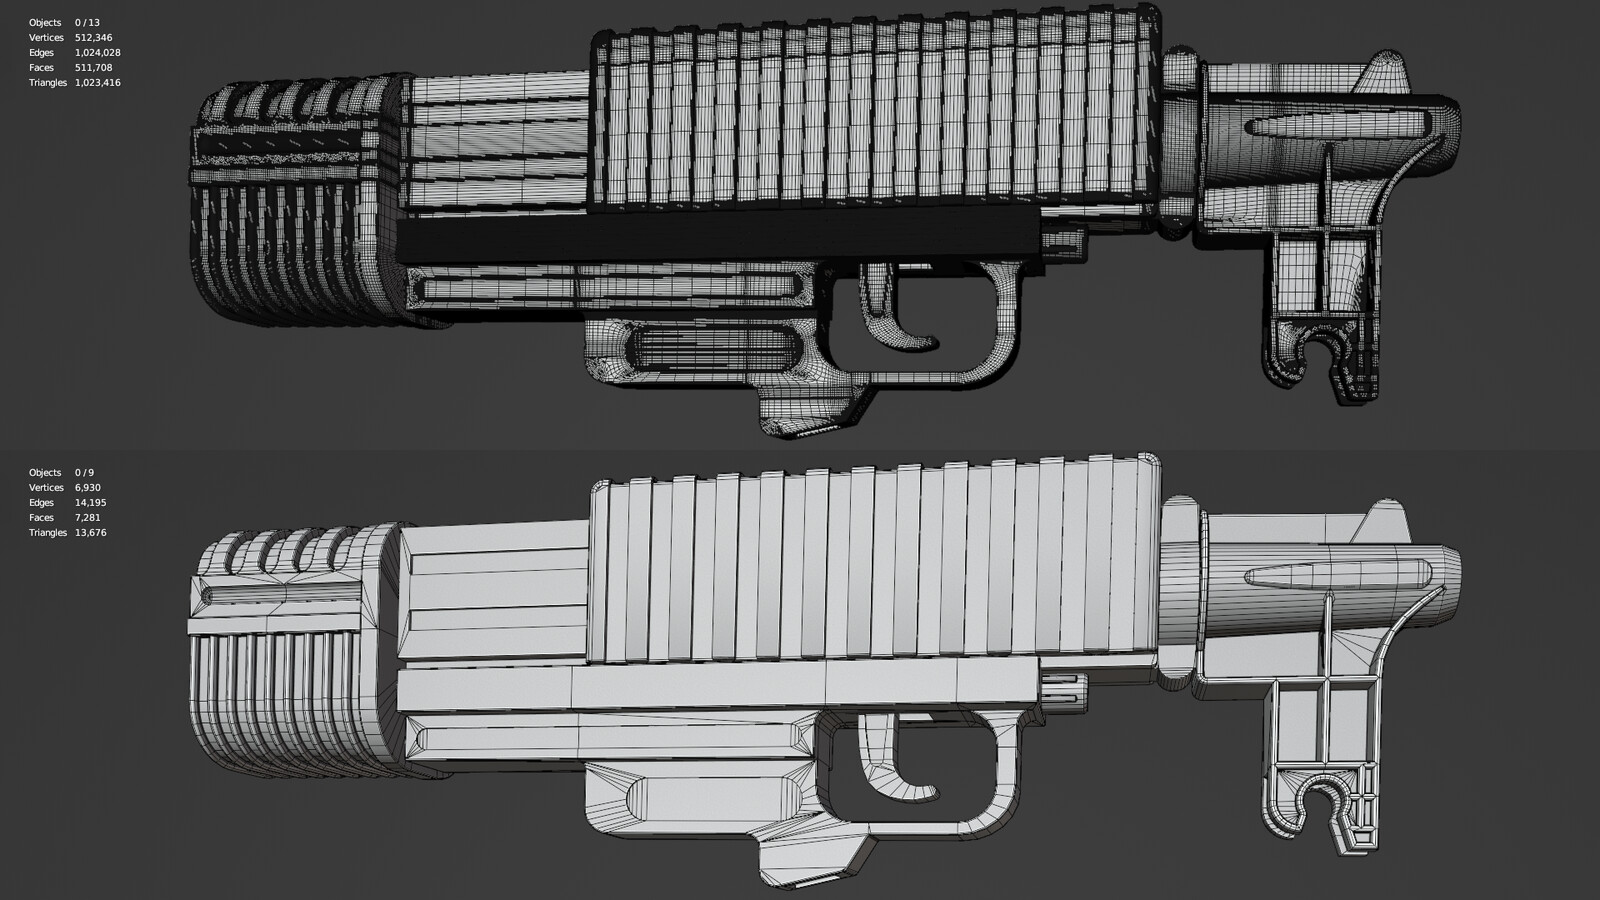 High res model created with subdivision surface modeling VS the game res model.